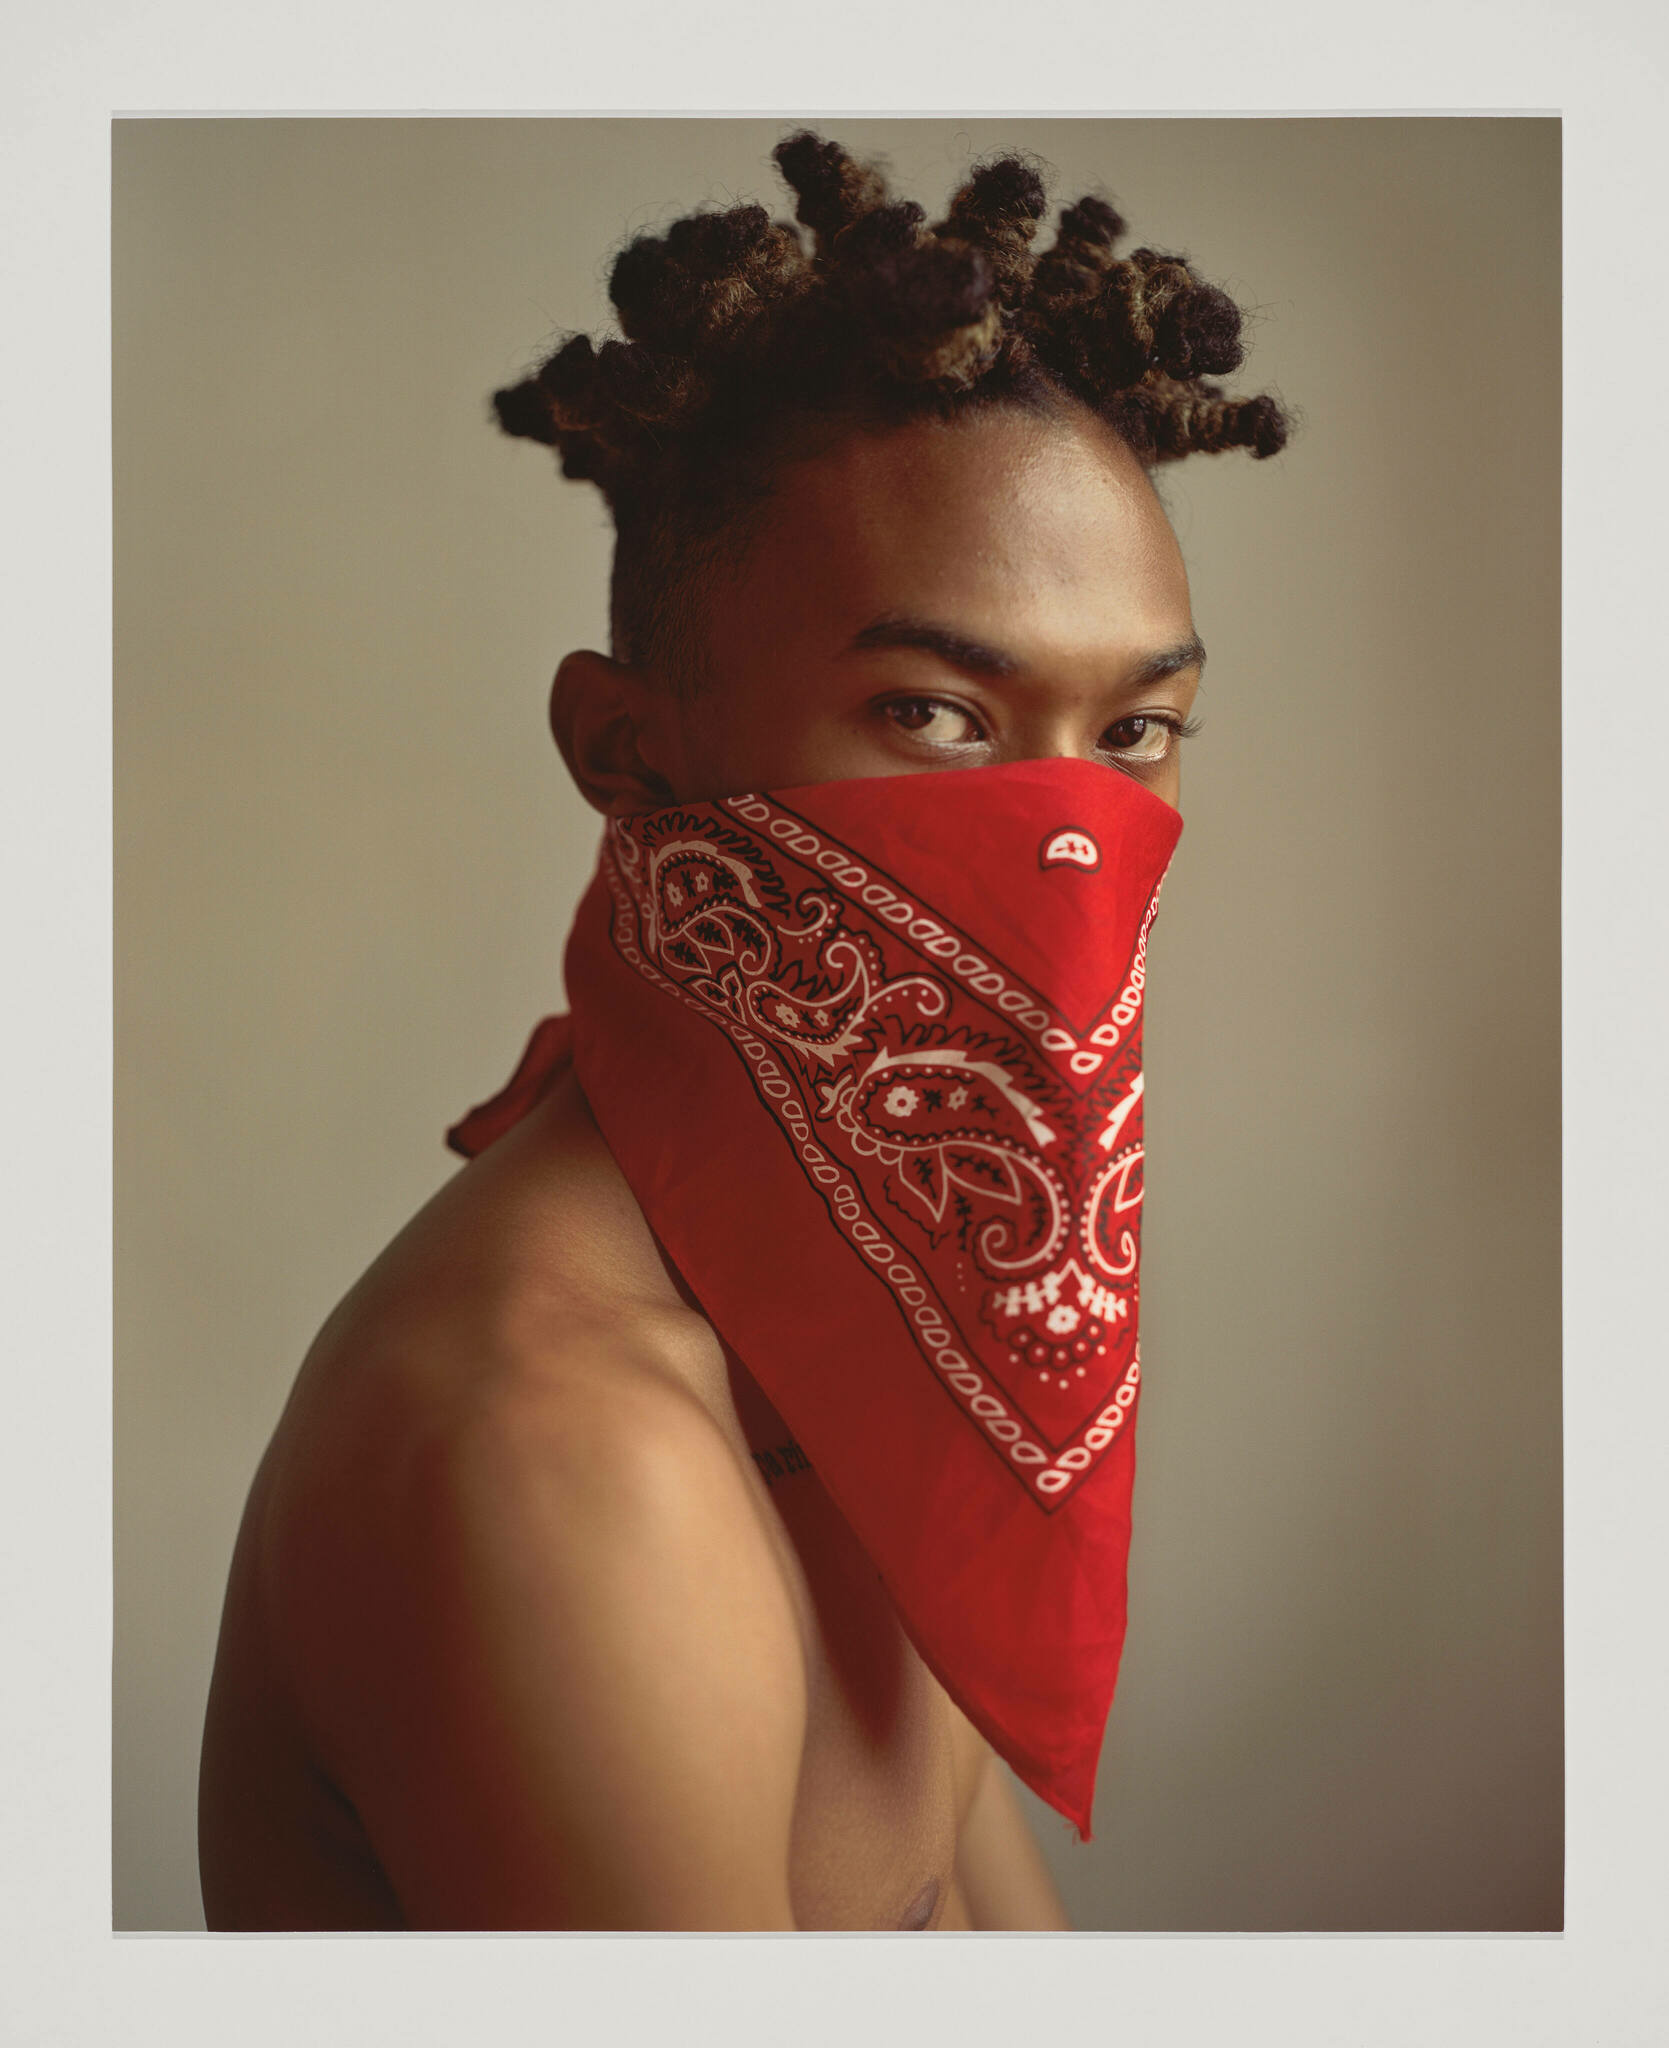 A young Black man stares at the viewer and red handkerchief tied around his head covers his nose and mouth 